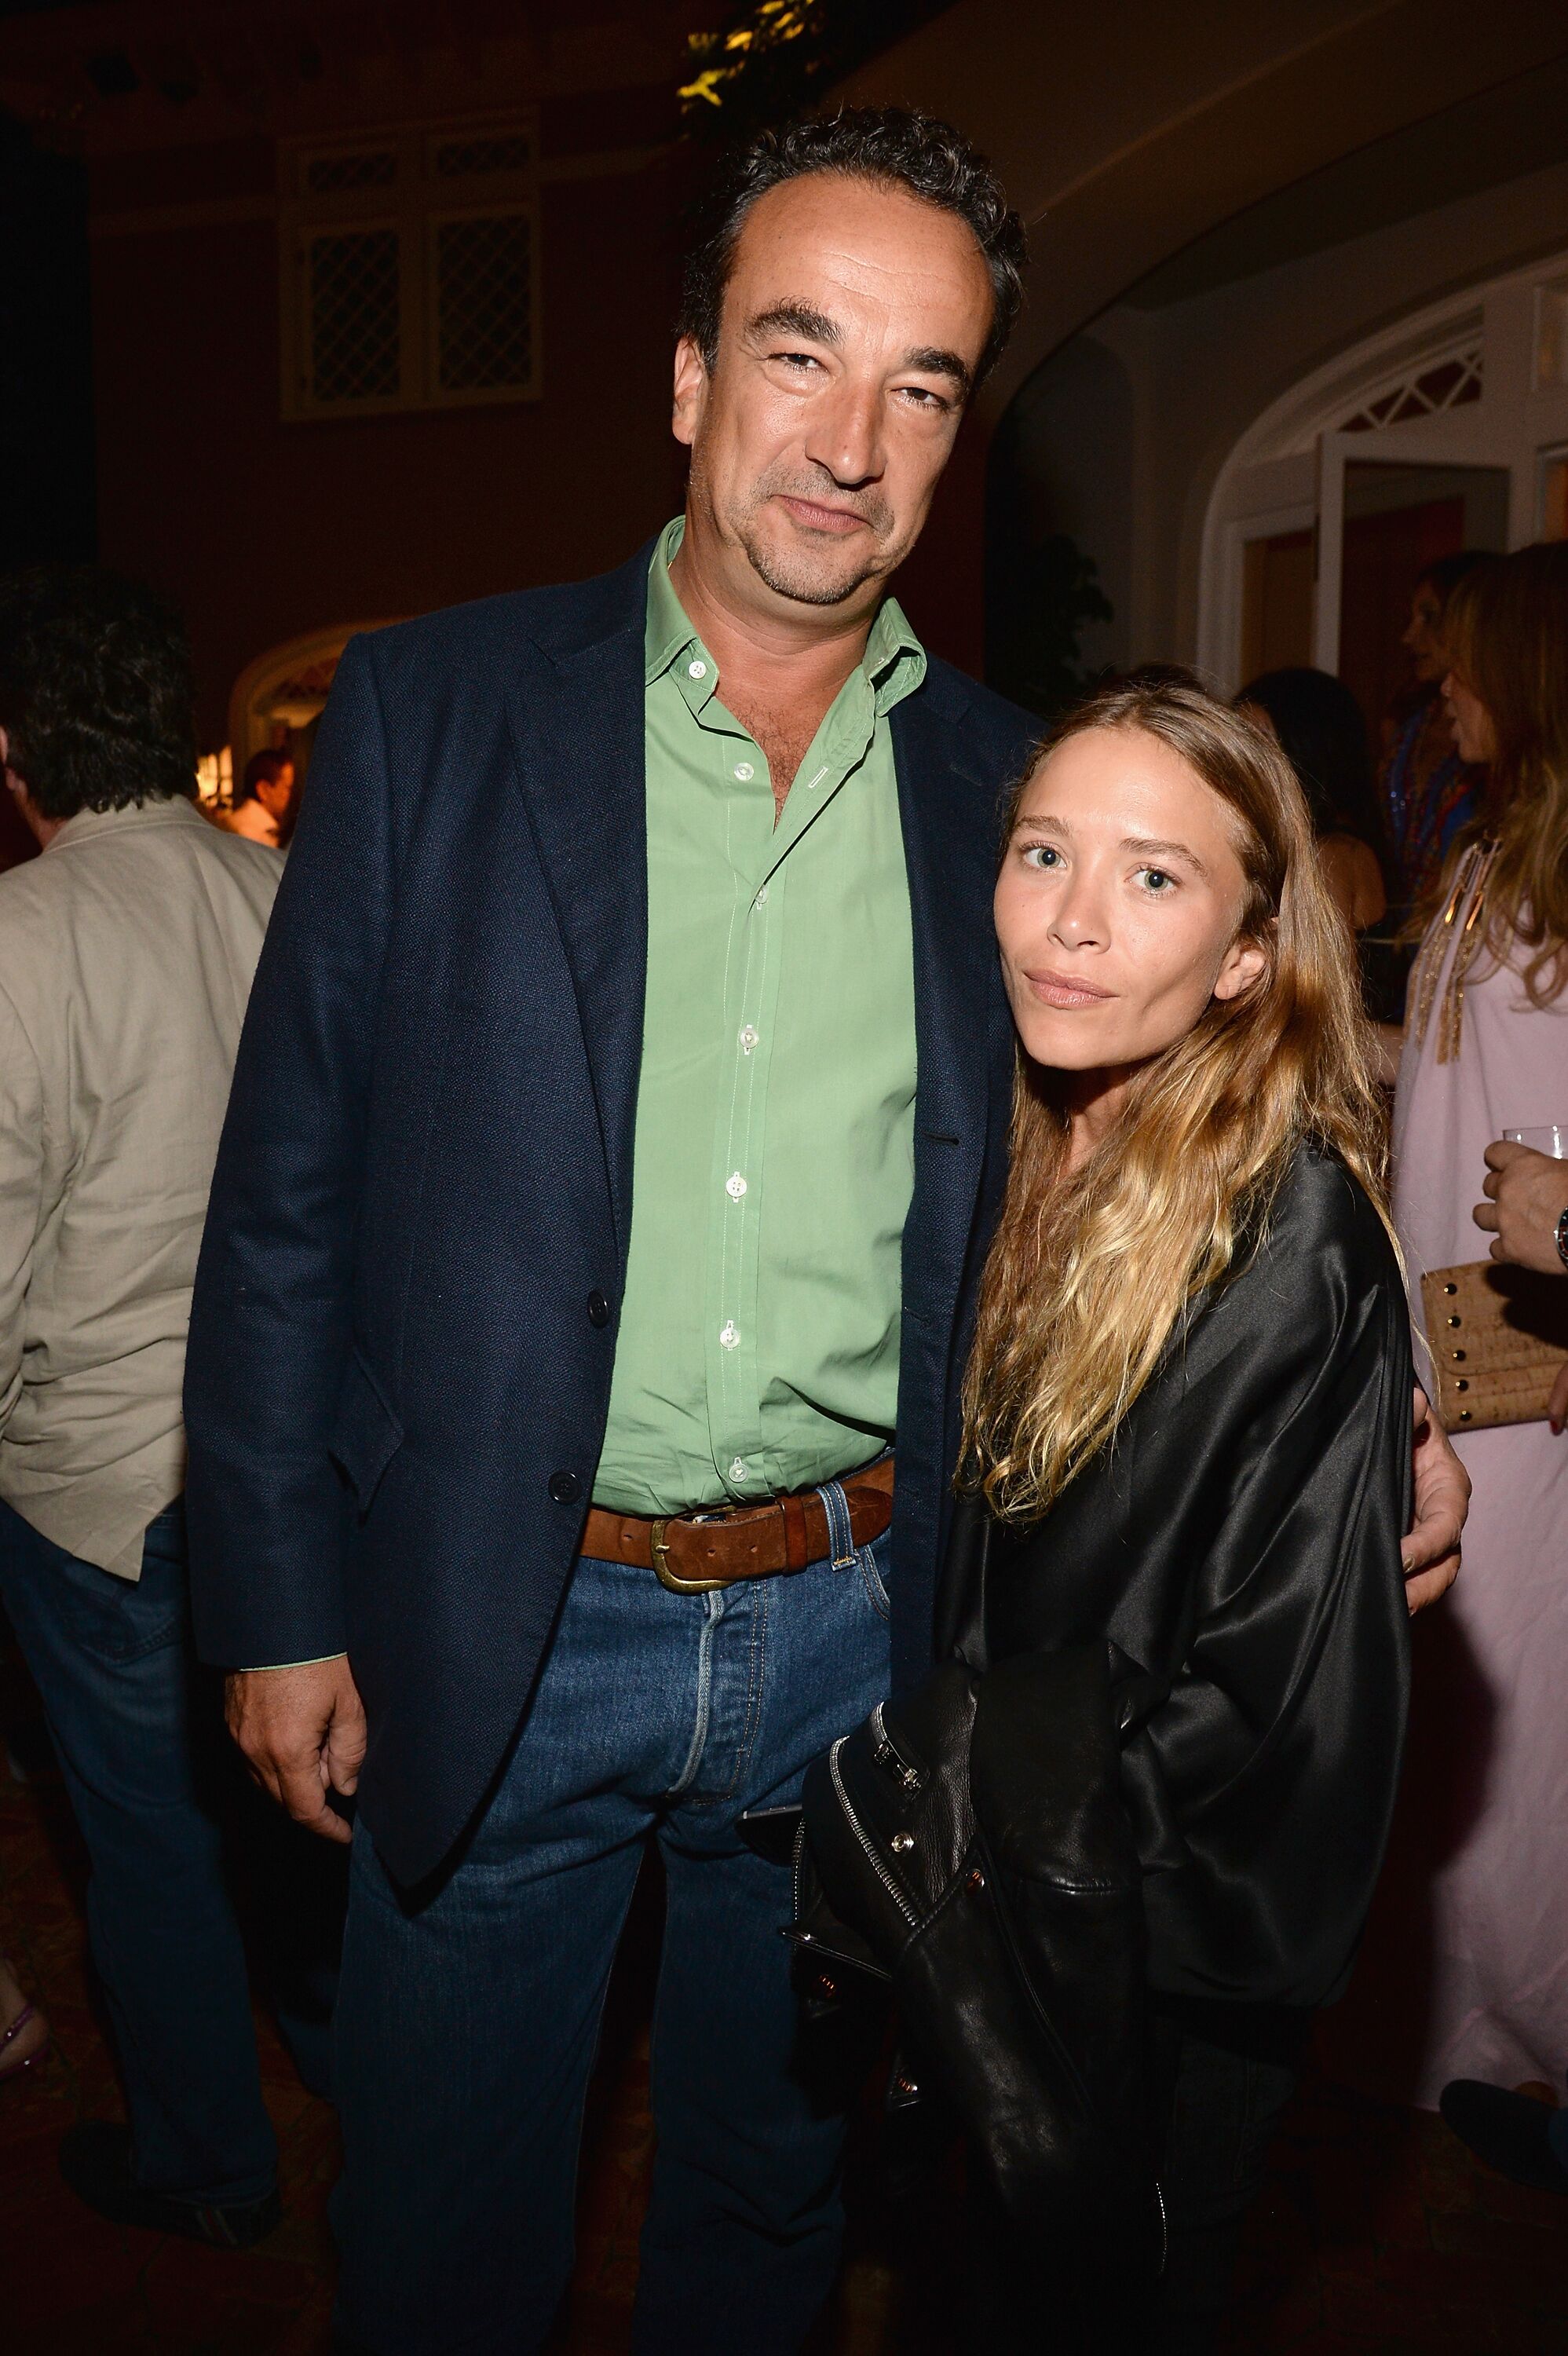 Olivier Sarkozy and Mary-Kate Olsen attend Apollo in the Hamptons 2015 at The Creeks on August 15, 2015 in East Hampton, New York | Photo: Getty Images 